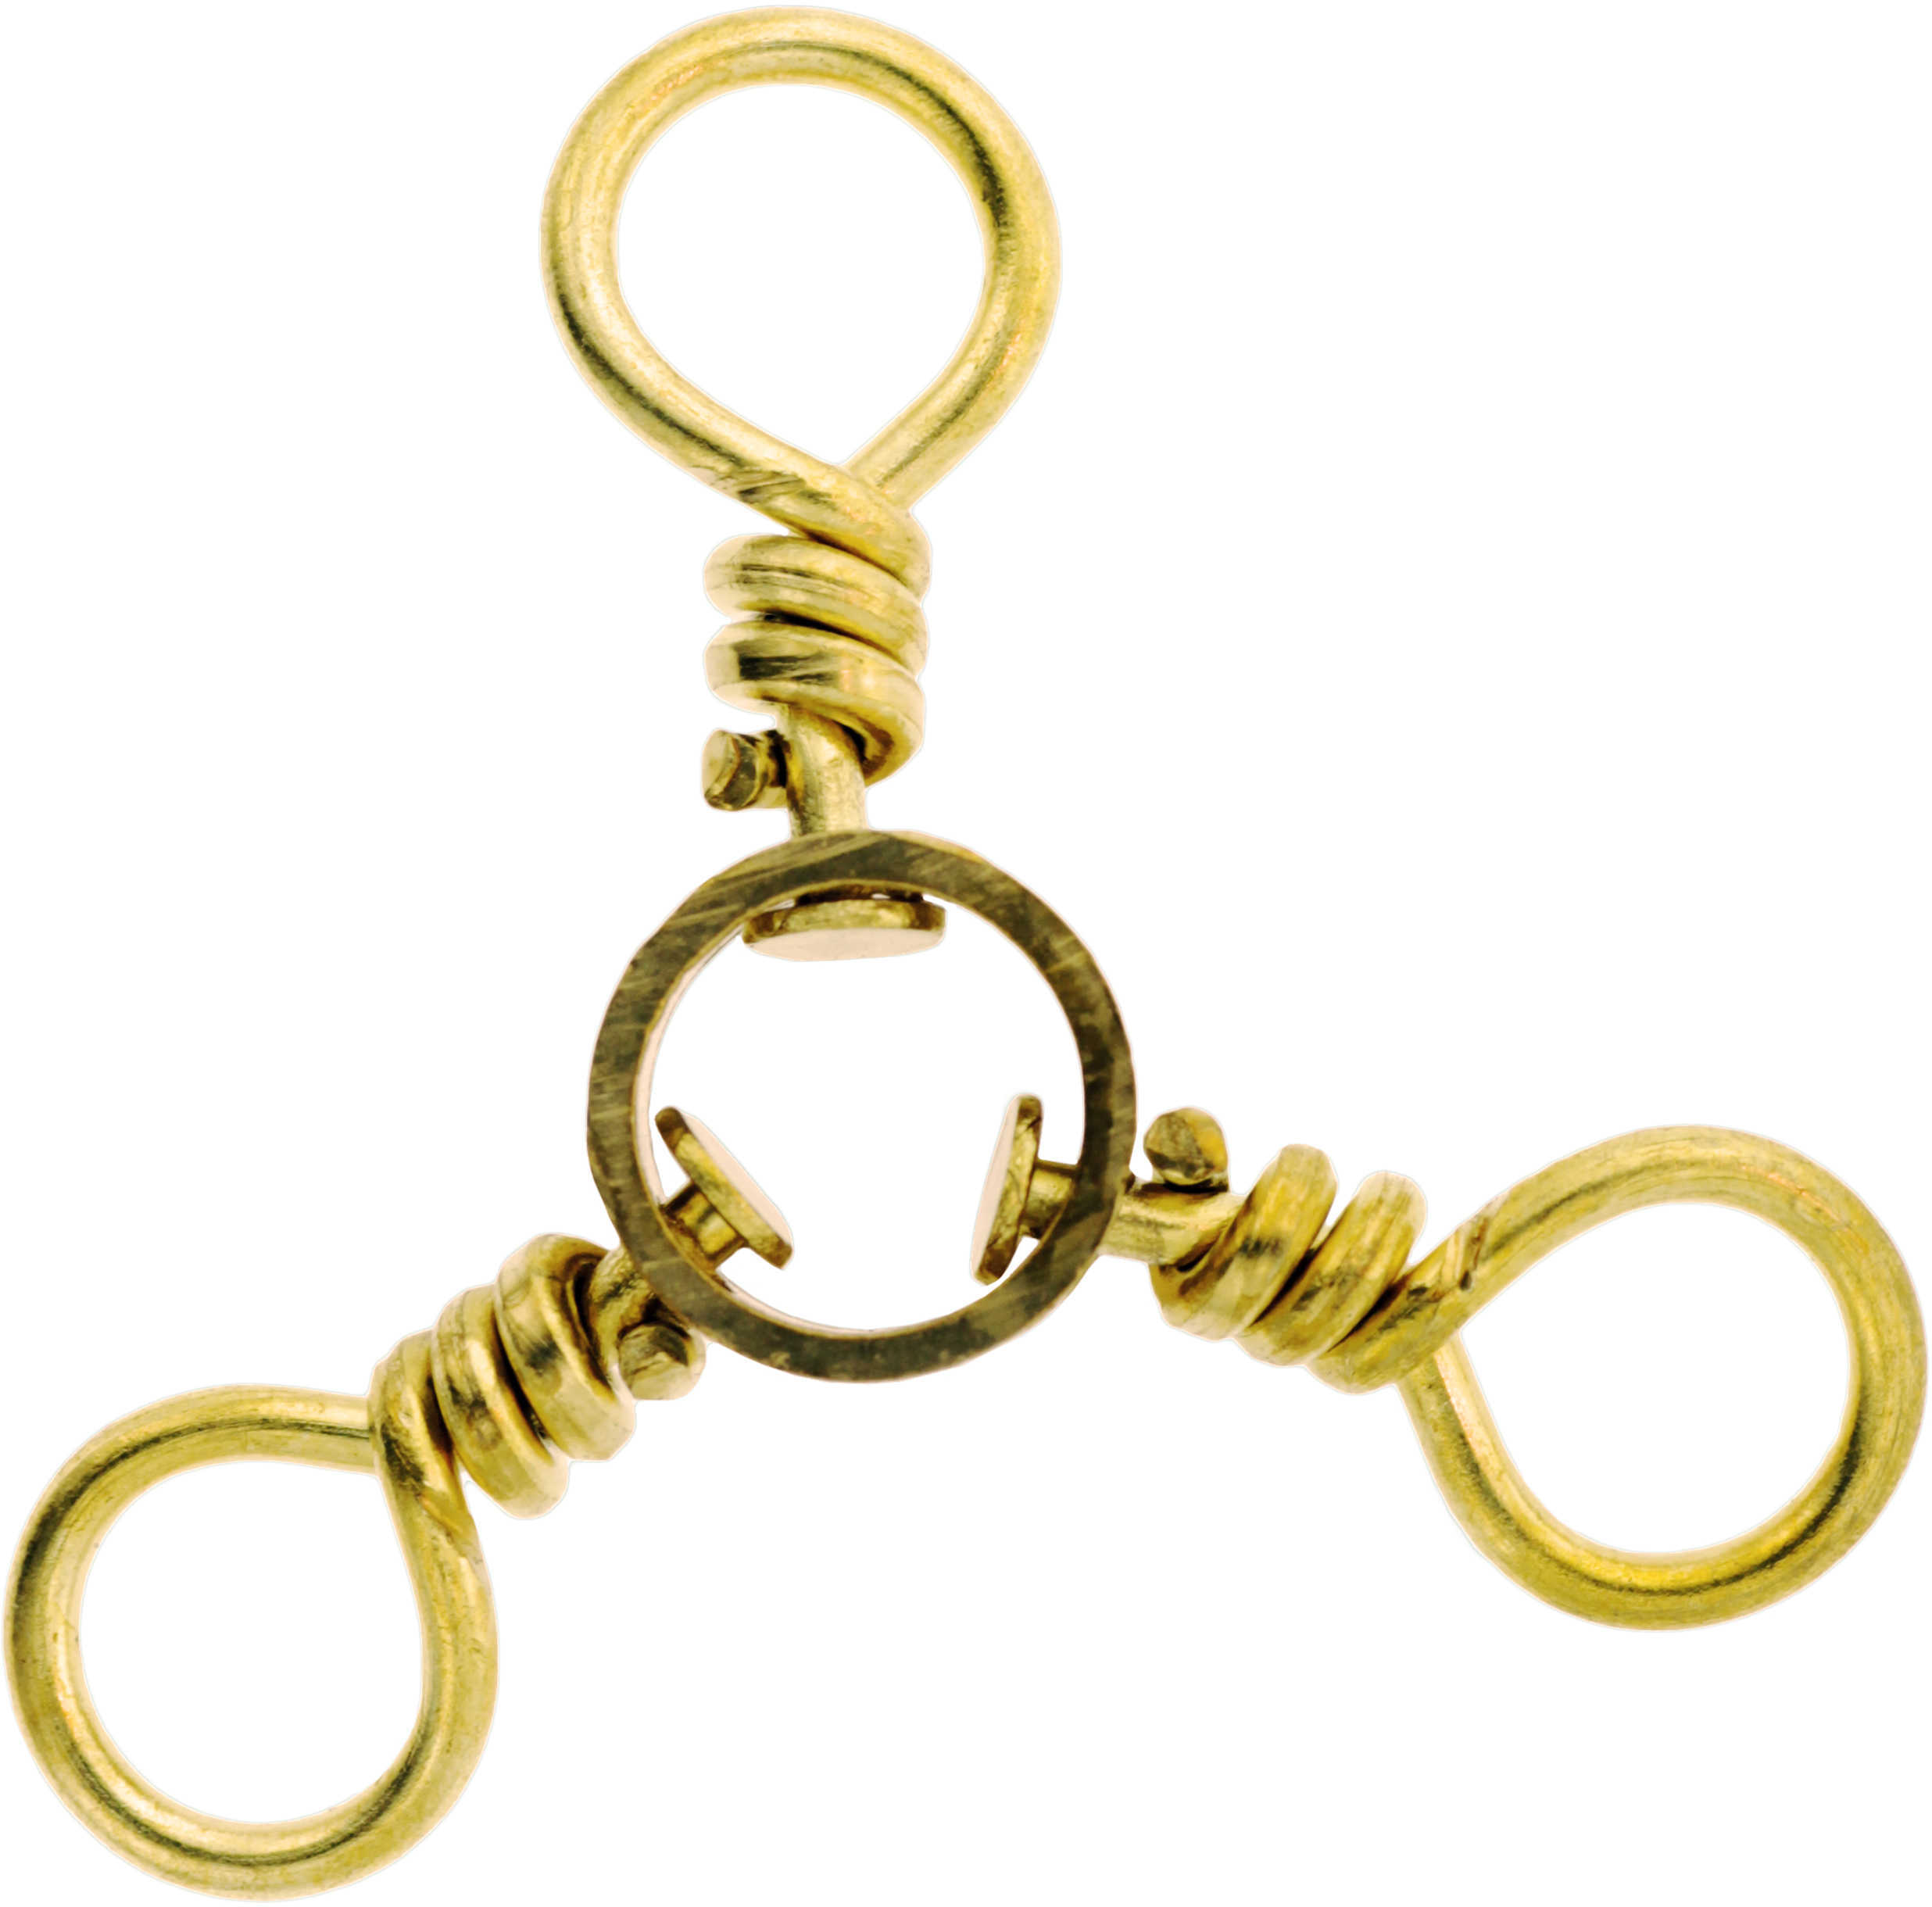 Eagle Claw Fishing Tackle 3-Way Swivel, Brass Size 1 (Per 3) Md: 01151-001